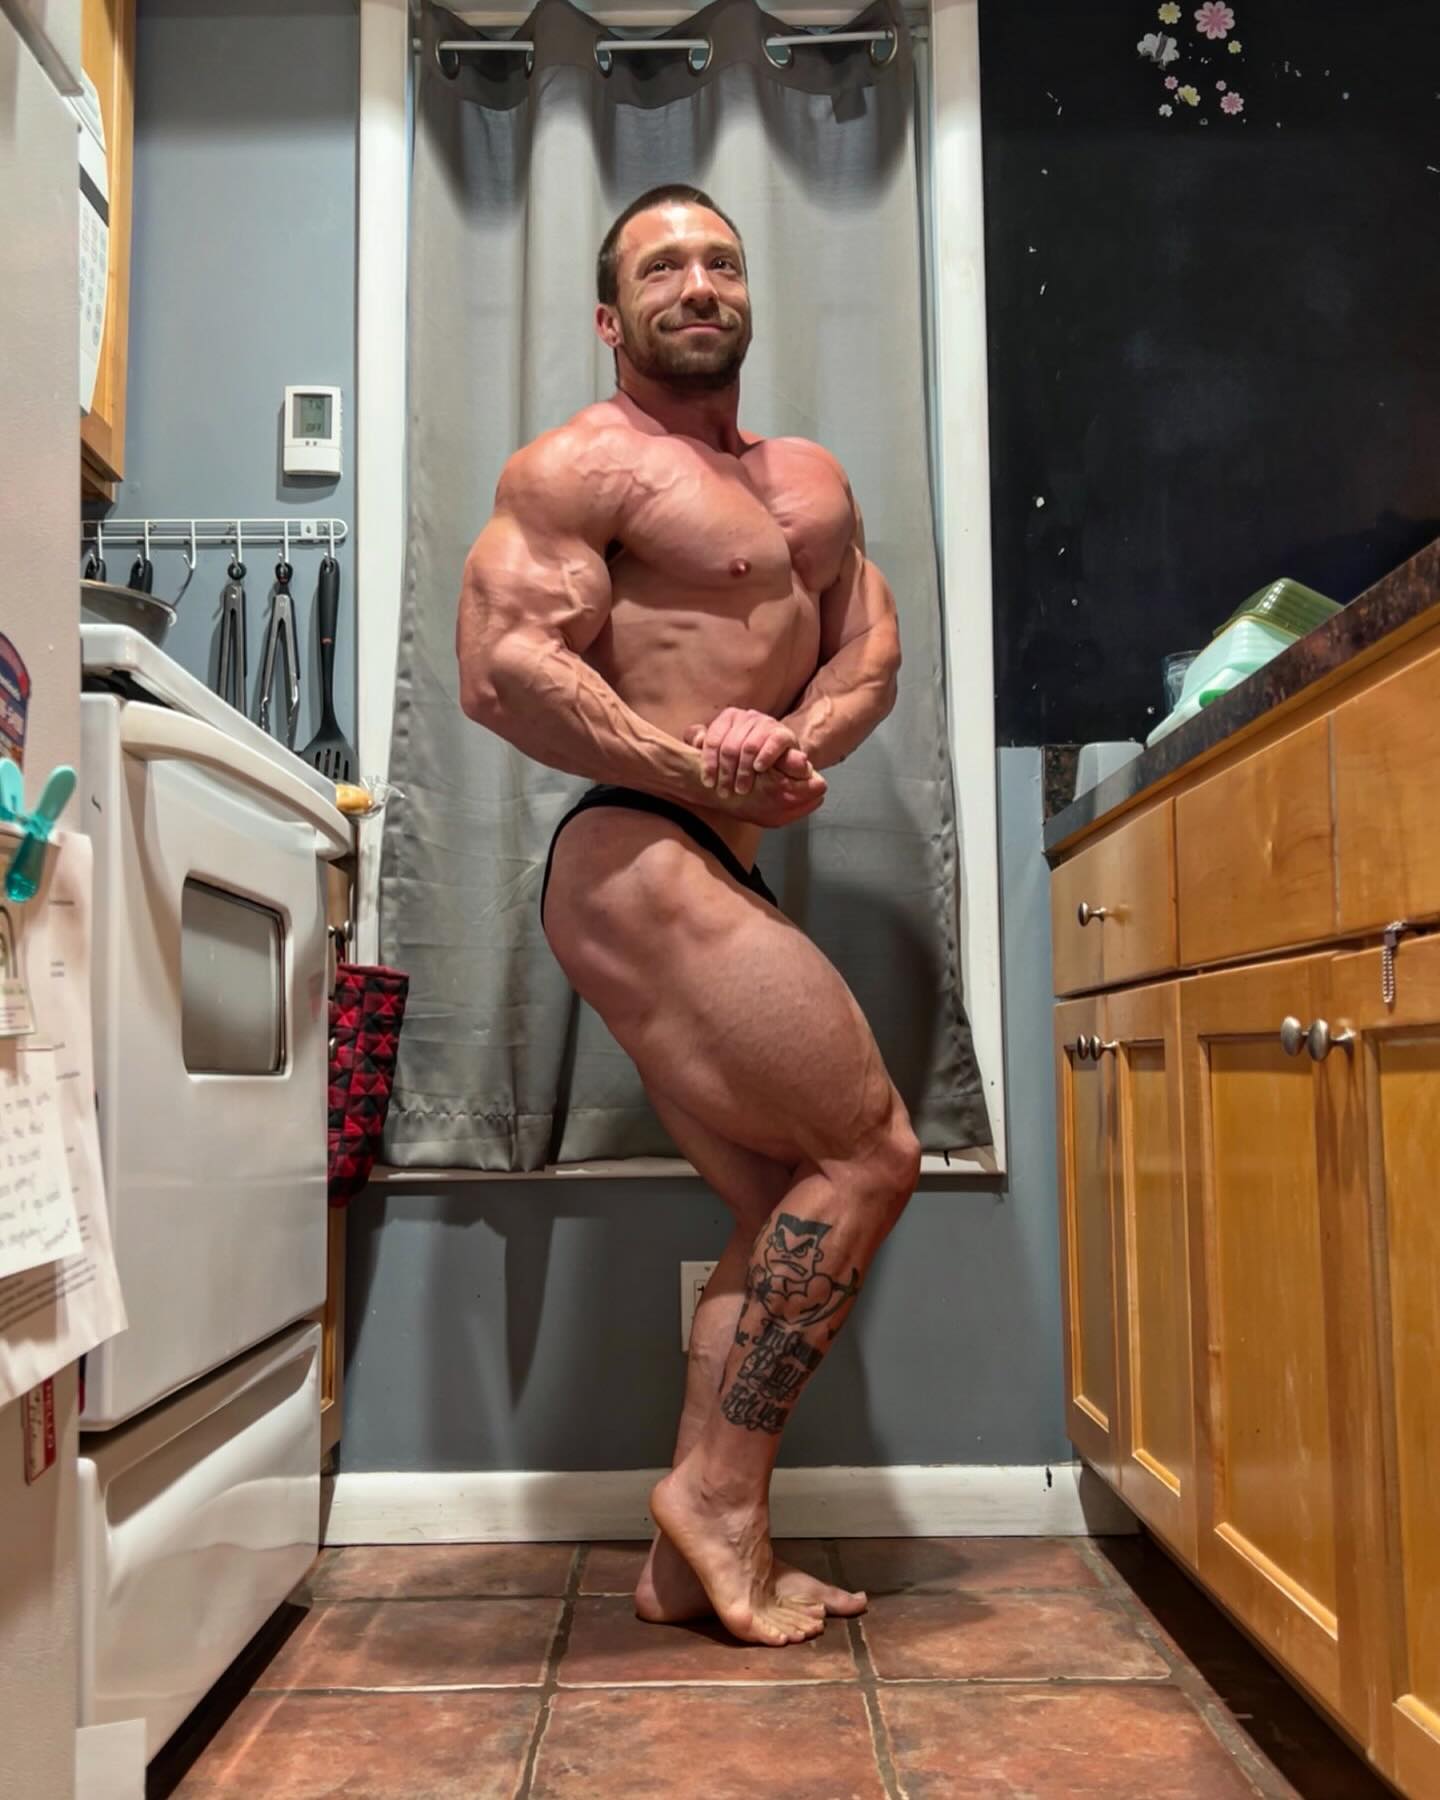 Tunnel vision… 13 days out 
.
@axeandsledge 
@sethferoce 
@sethferoce2.0 
@deanperrone , post show cooking ideas inspired by you 👍🏼

#tunnelvision #13daysout #2weeksout #quads #veins #npc #jrusas #procard #doagoodjob #axeandsledge #rawnutrition #classicphysique #bodybuilding #shredded #quadzilla #quadlife #abs